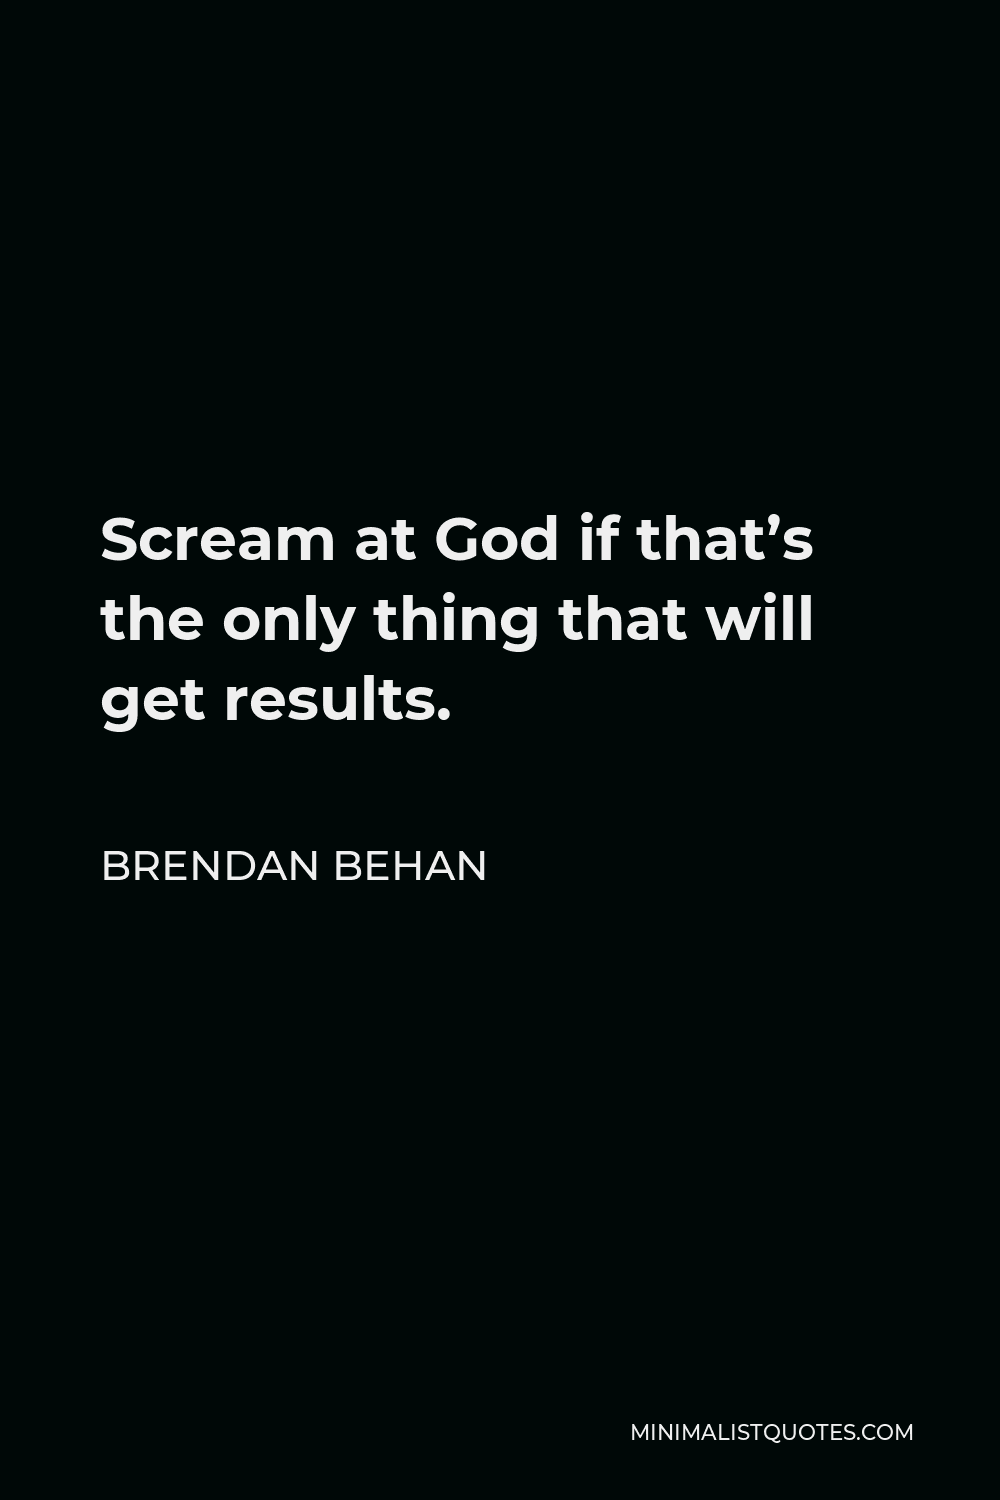 Brendan Behan Quote - Scream at God if that’s the only thing that will get results.